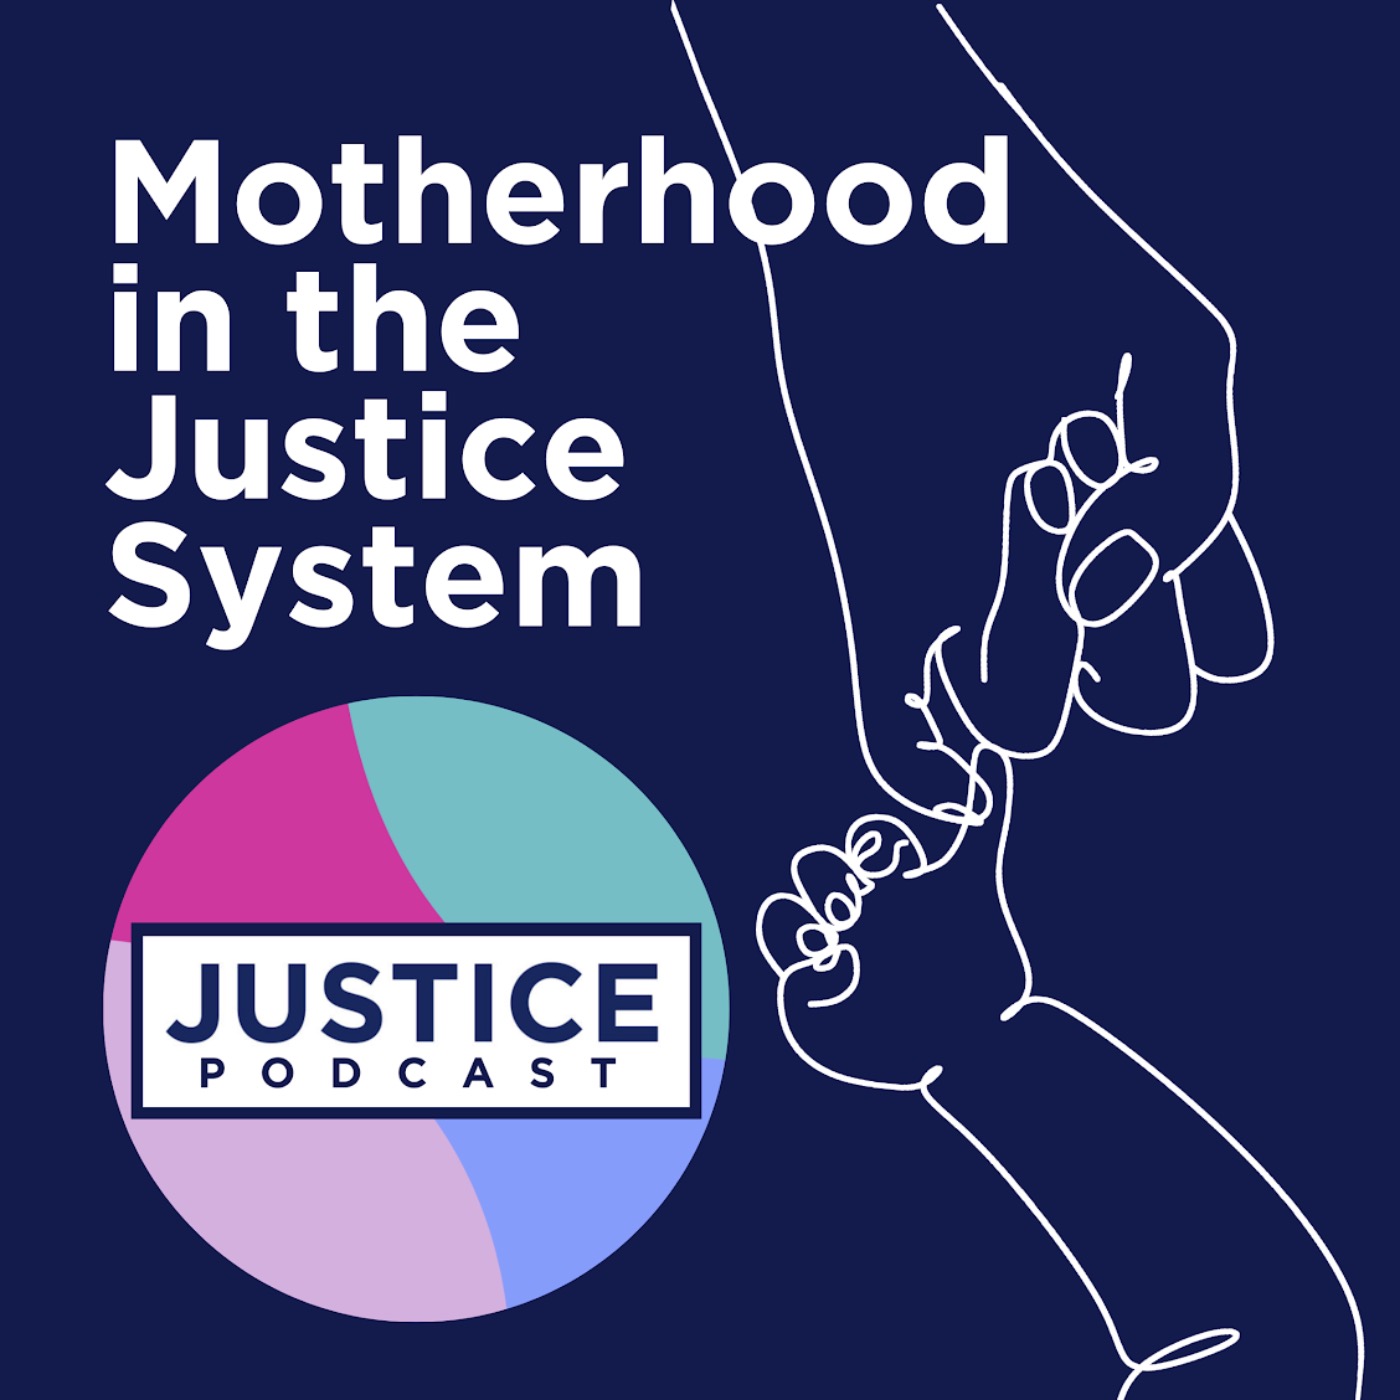 Mothers in prison – a social work perspective